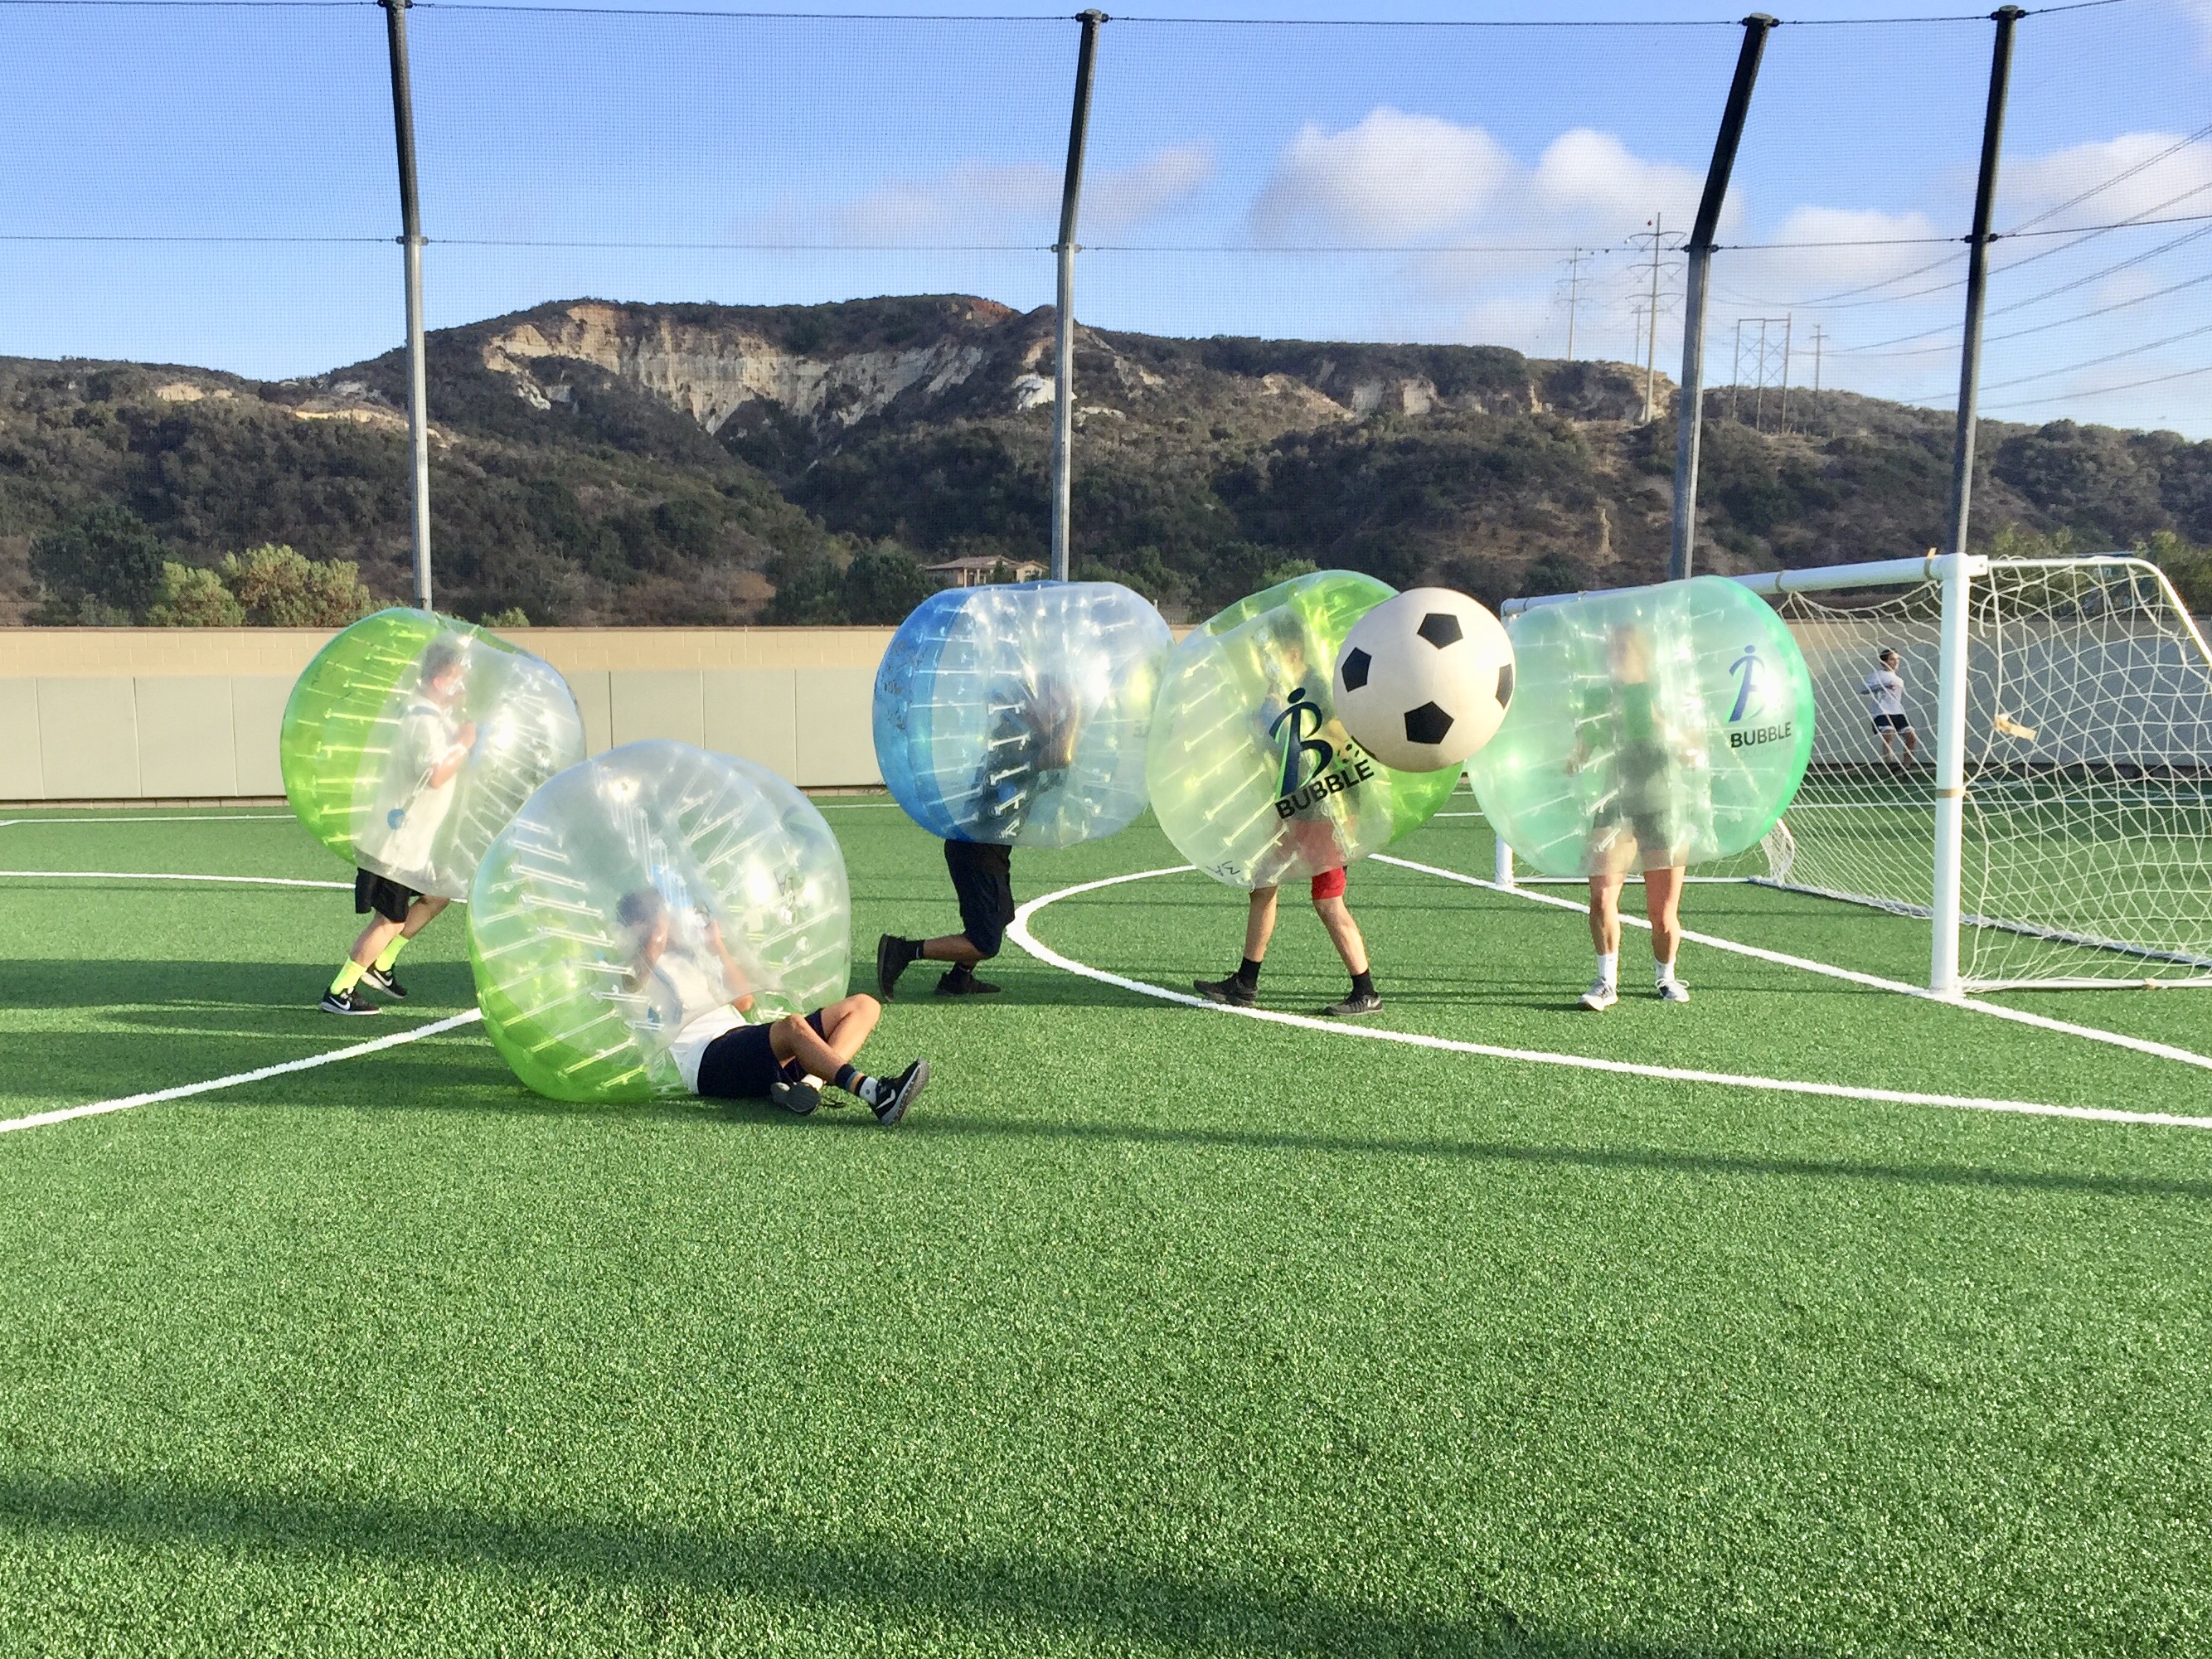 Bubble Soccer at the San Diego Gulls Ice Rink